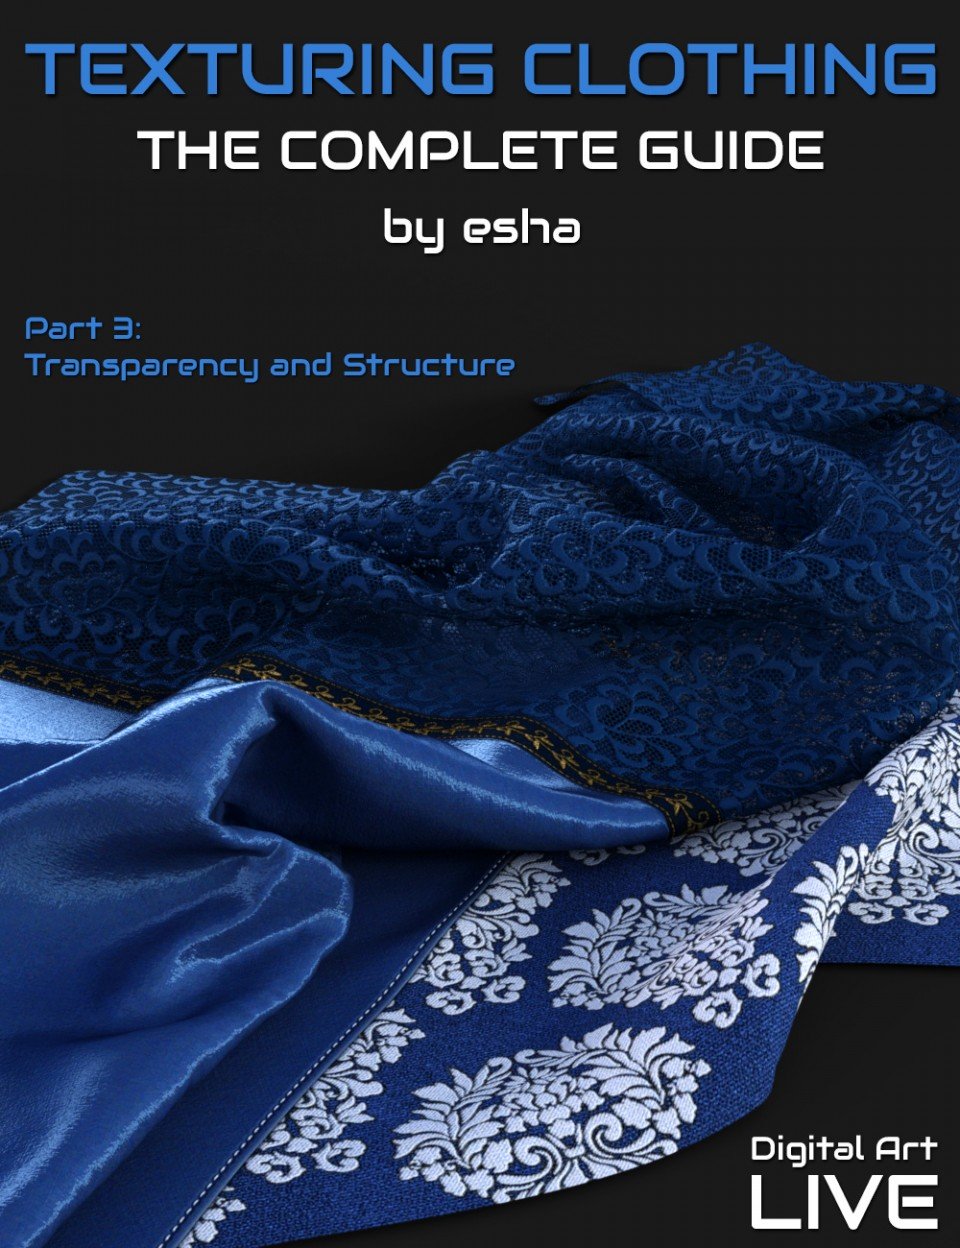 The Complete Guide to Texturing Clothing – Part 3_DAZ3D下载站